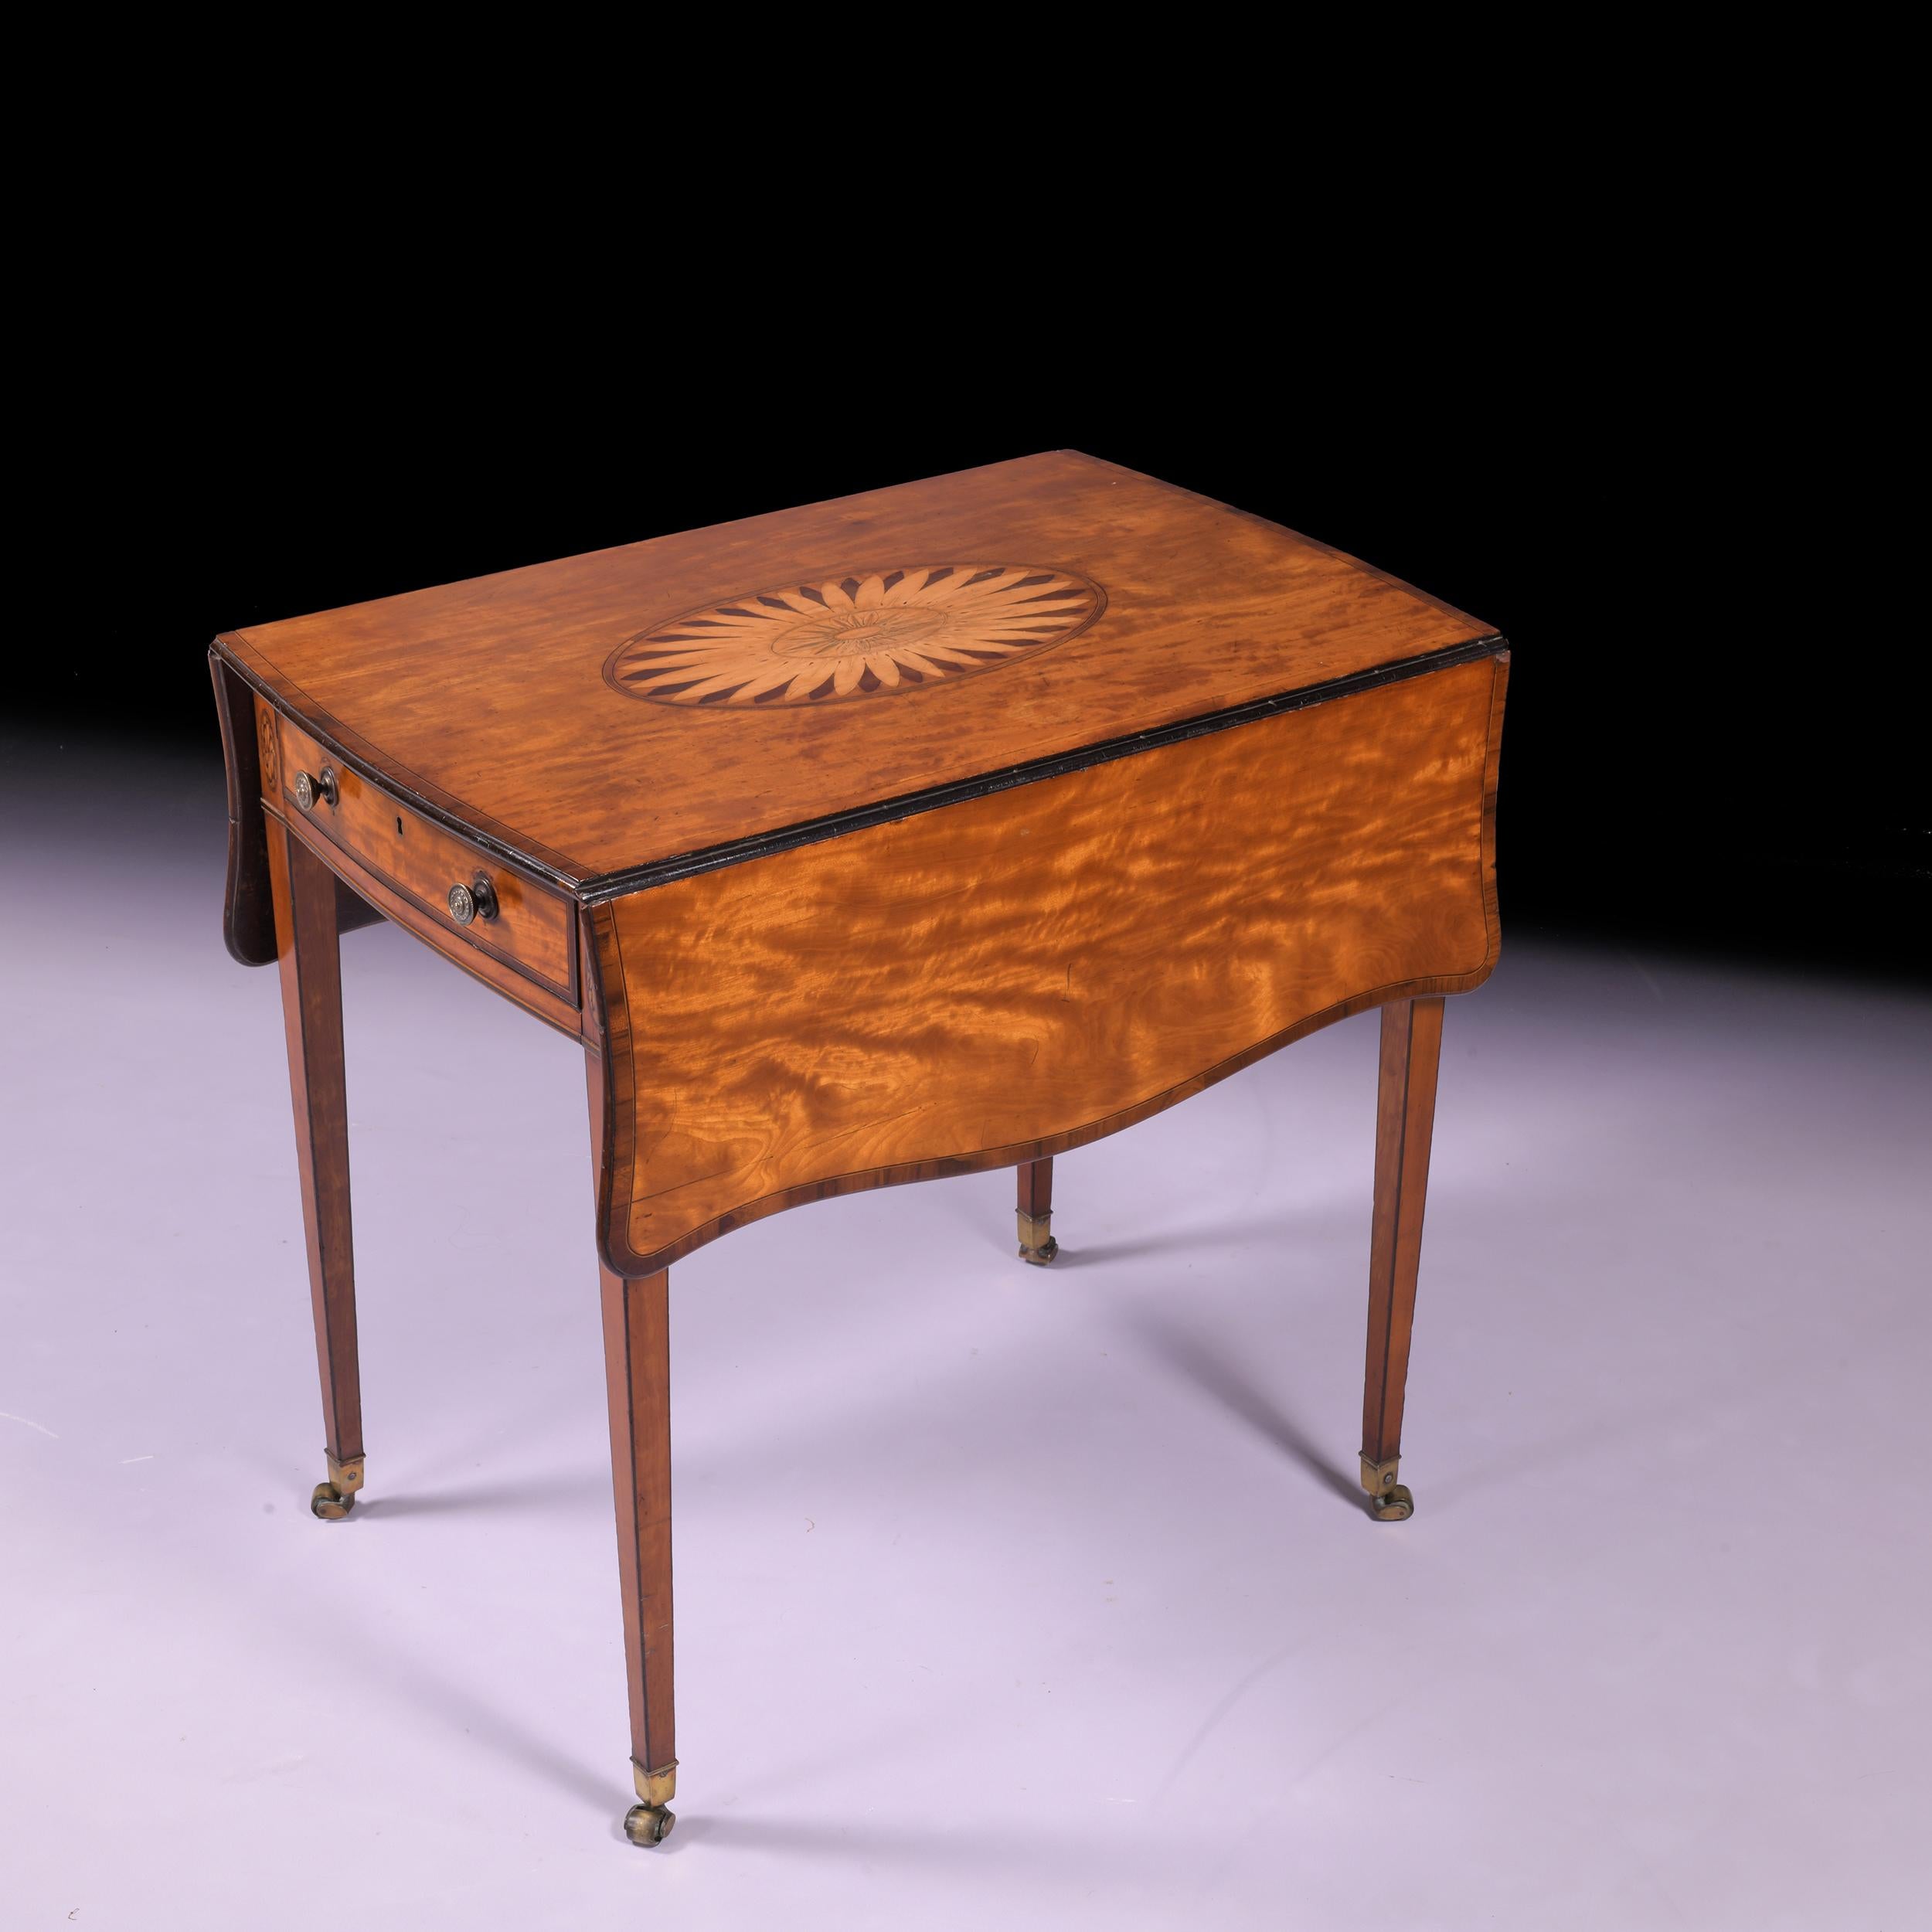 A very fine George III Satinwood Pembroke table, with twin serpentine drop leaves, moulded rim, the top with central oval patera above a single frieze drawer on channelled tapering legs on castors

Circa 1790

English

Dimensions:

H: 27.95 in / 71